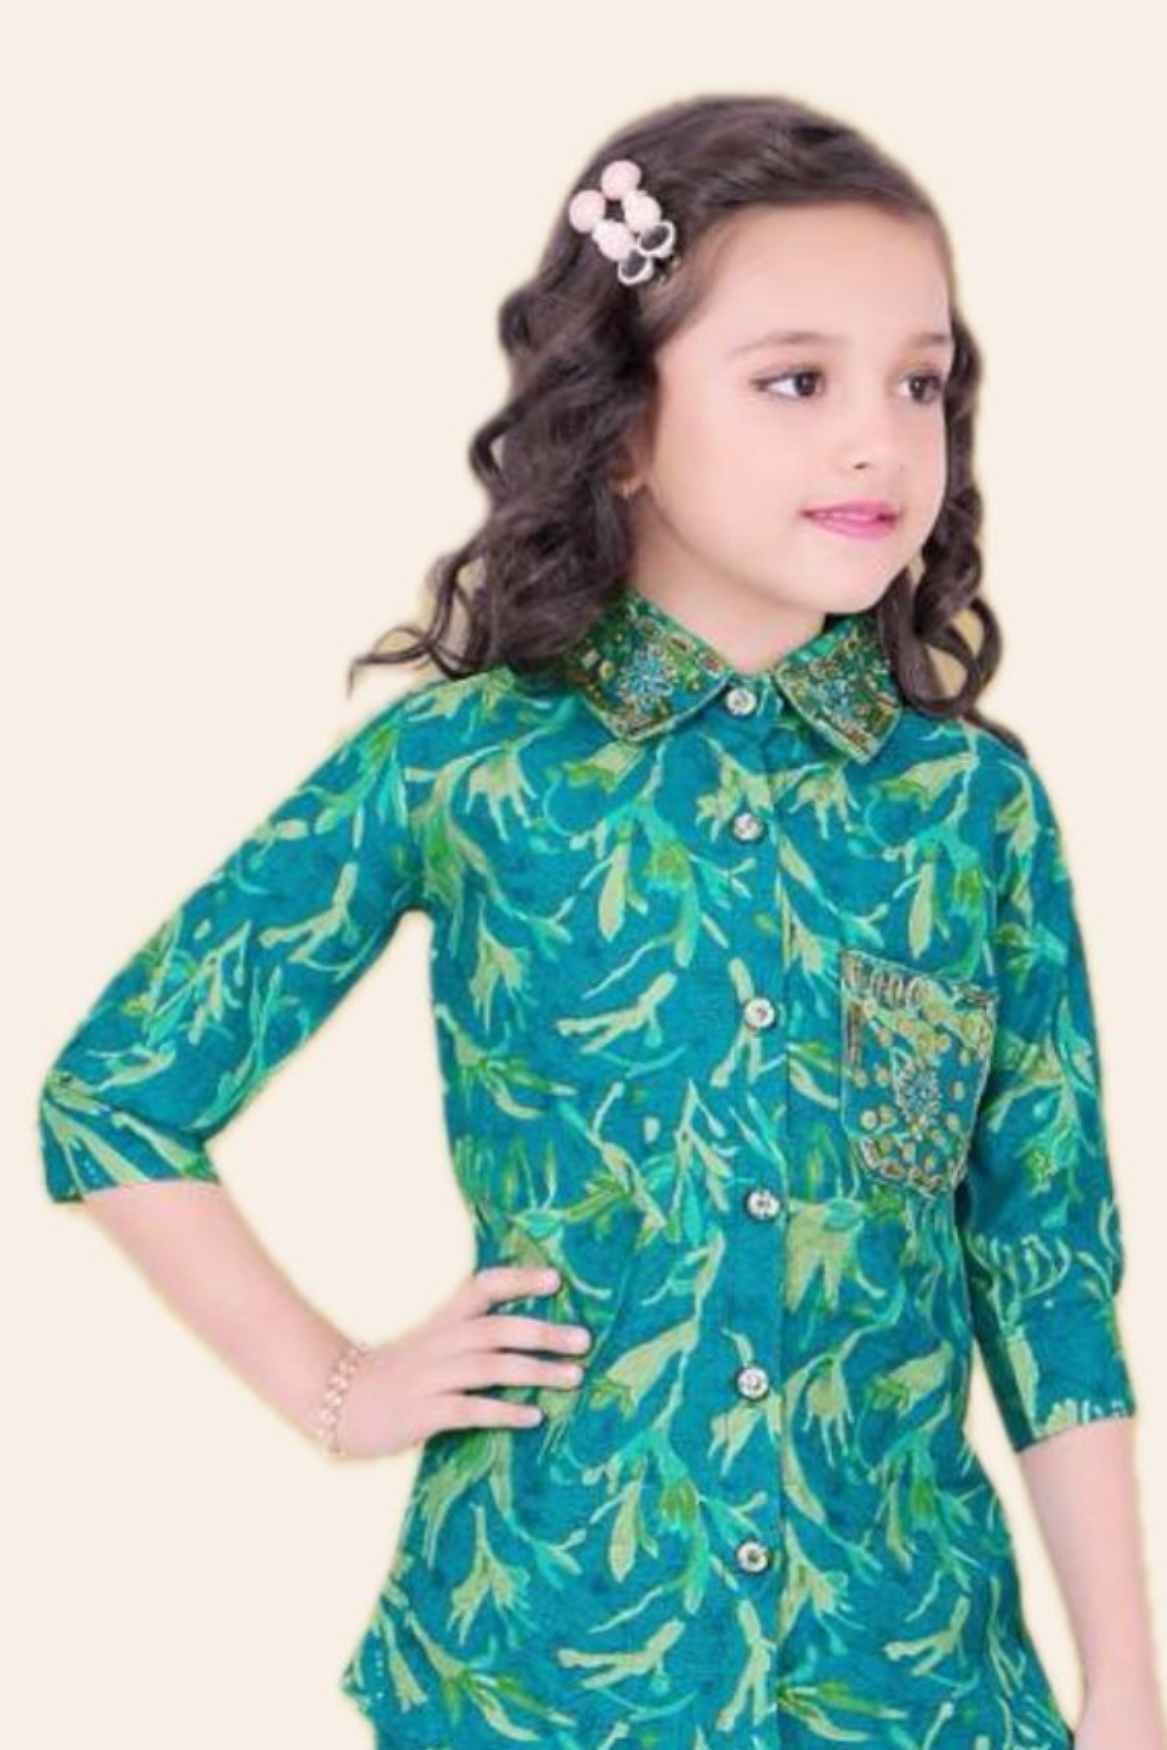 Turquoise Green Floral Printed Co-ord Set For Girls - Lagorii Kids